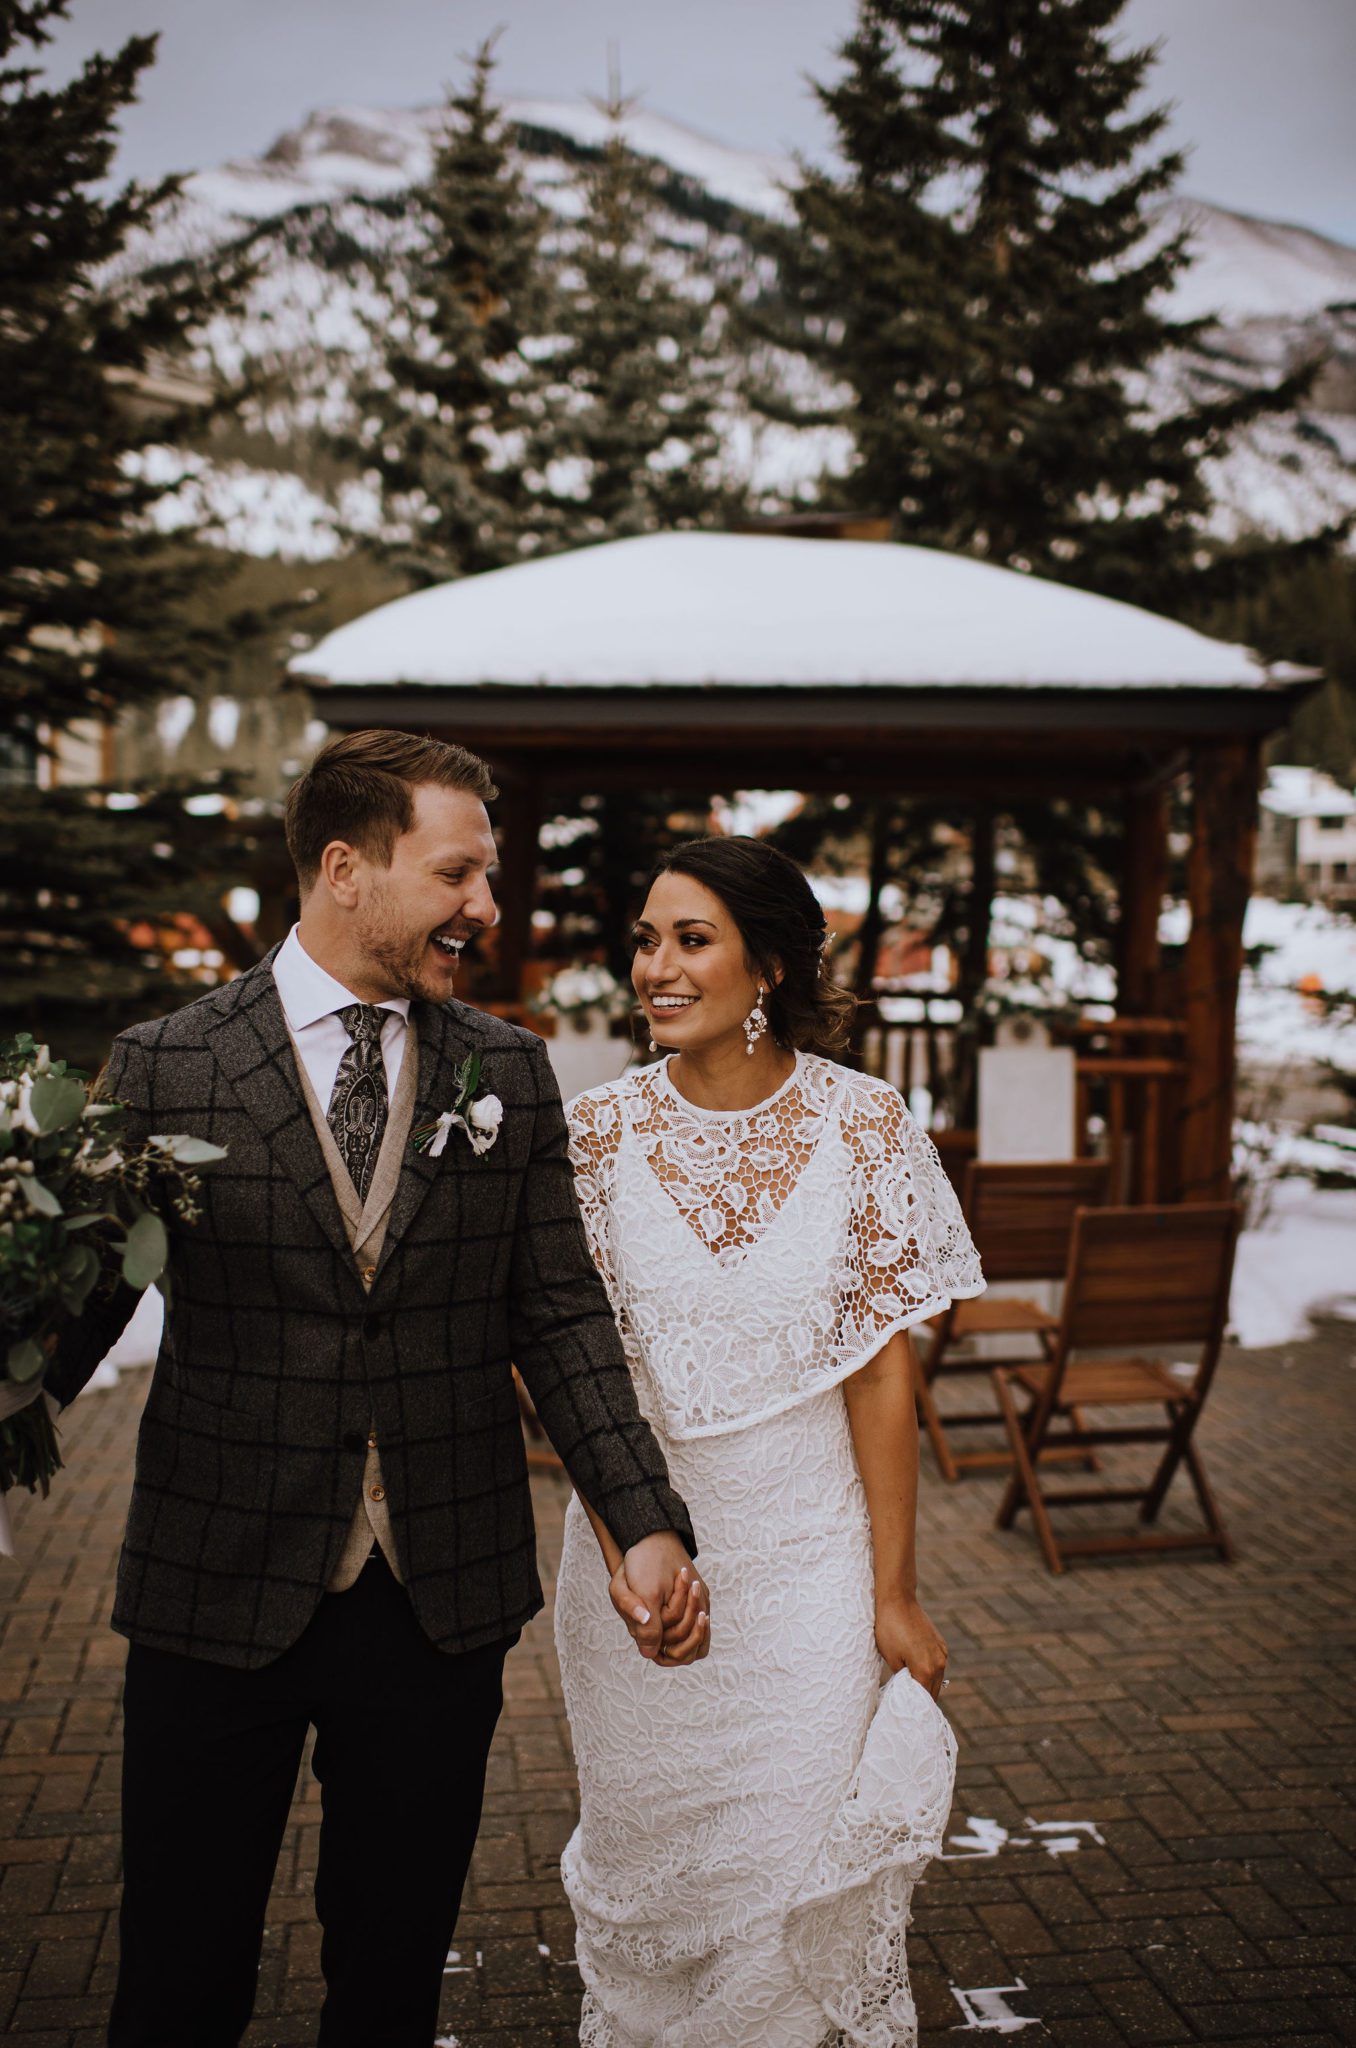 Intimate winter wedding inspiration at A Bear and Bison Inn in Canmore Alberta